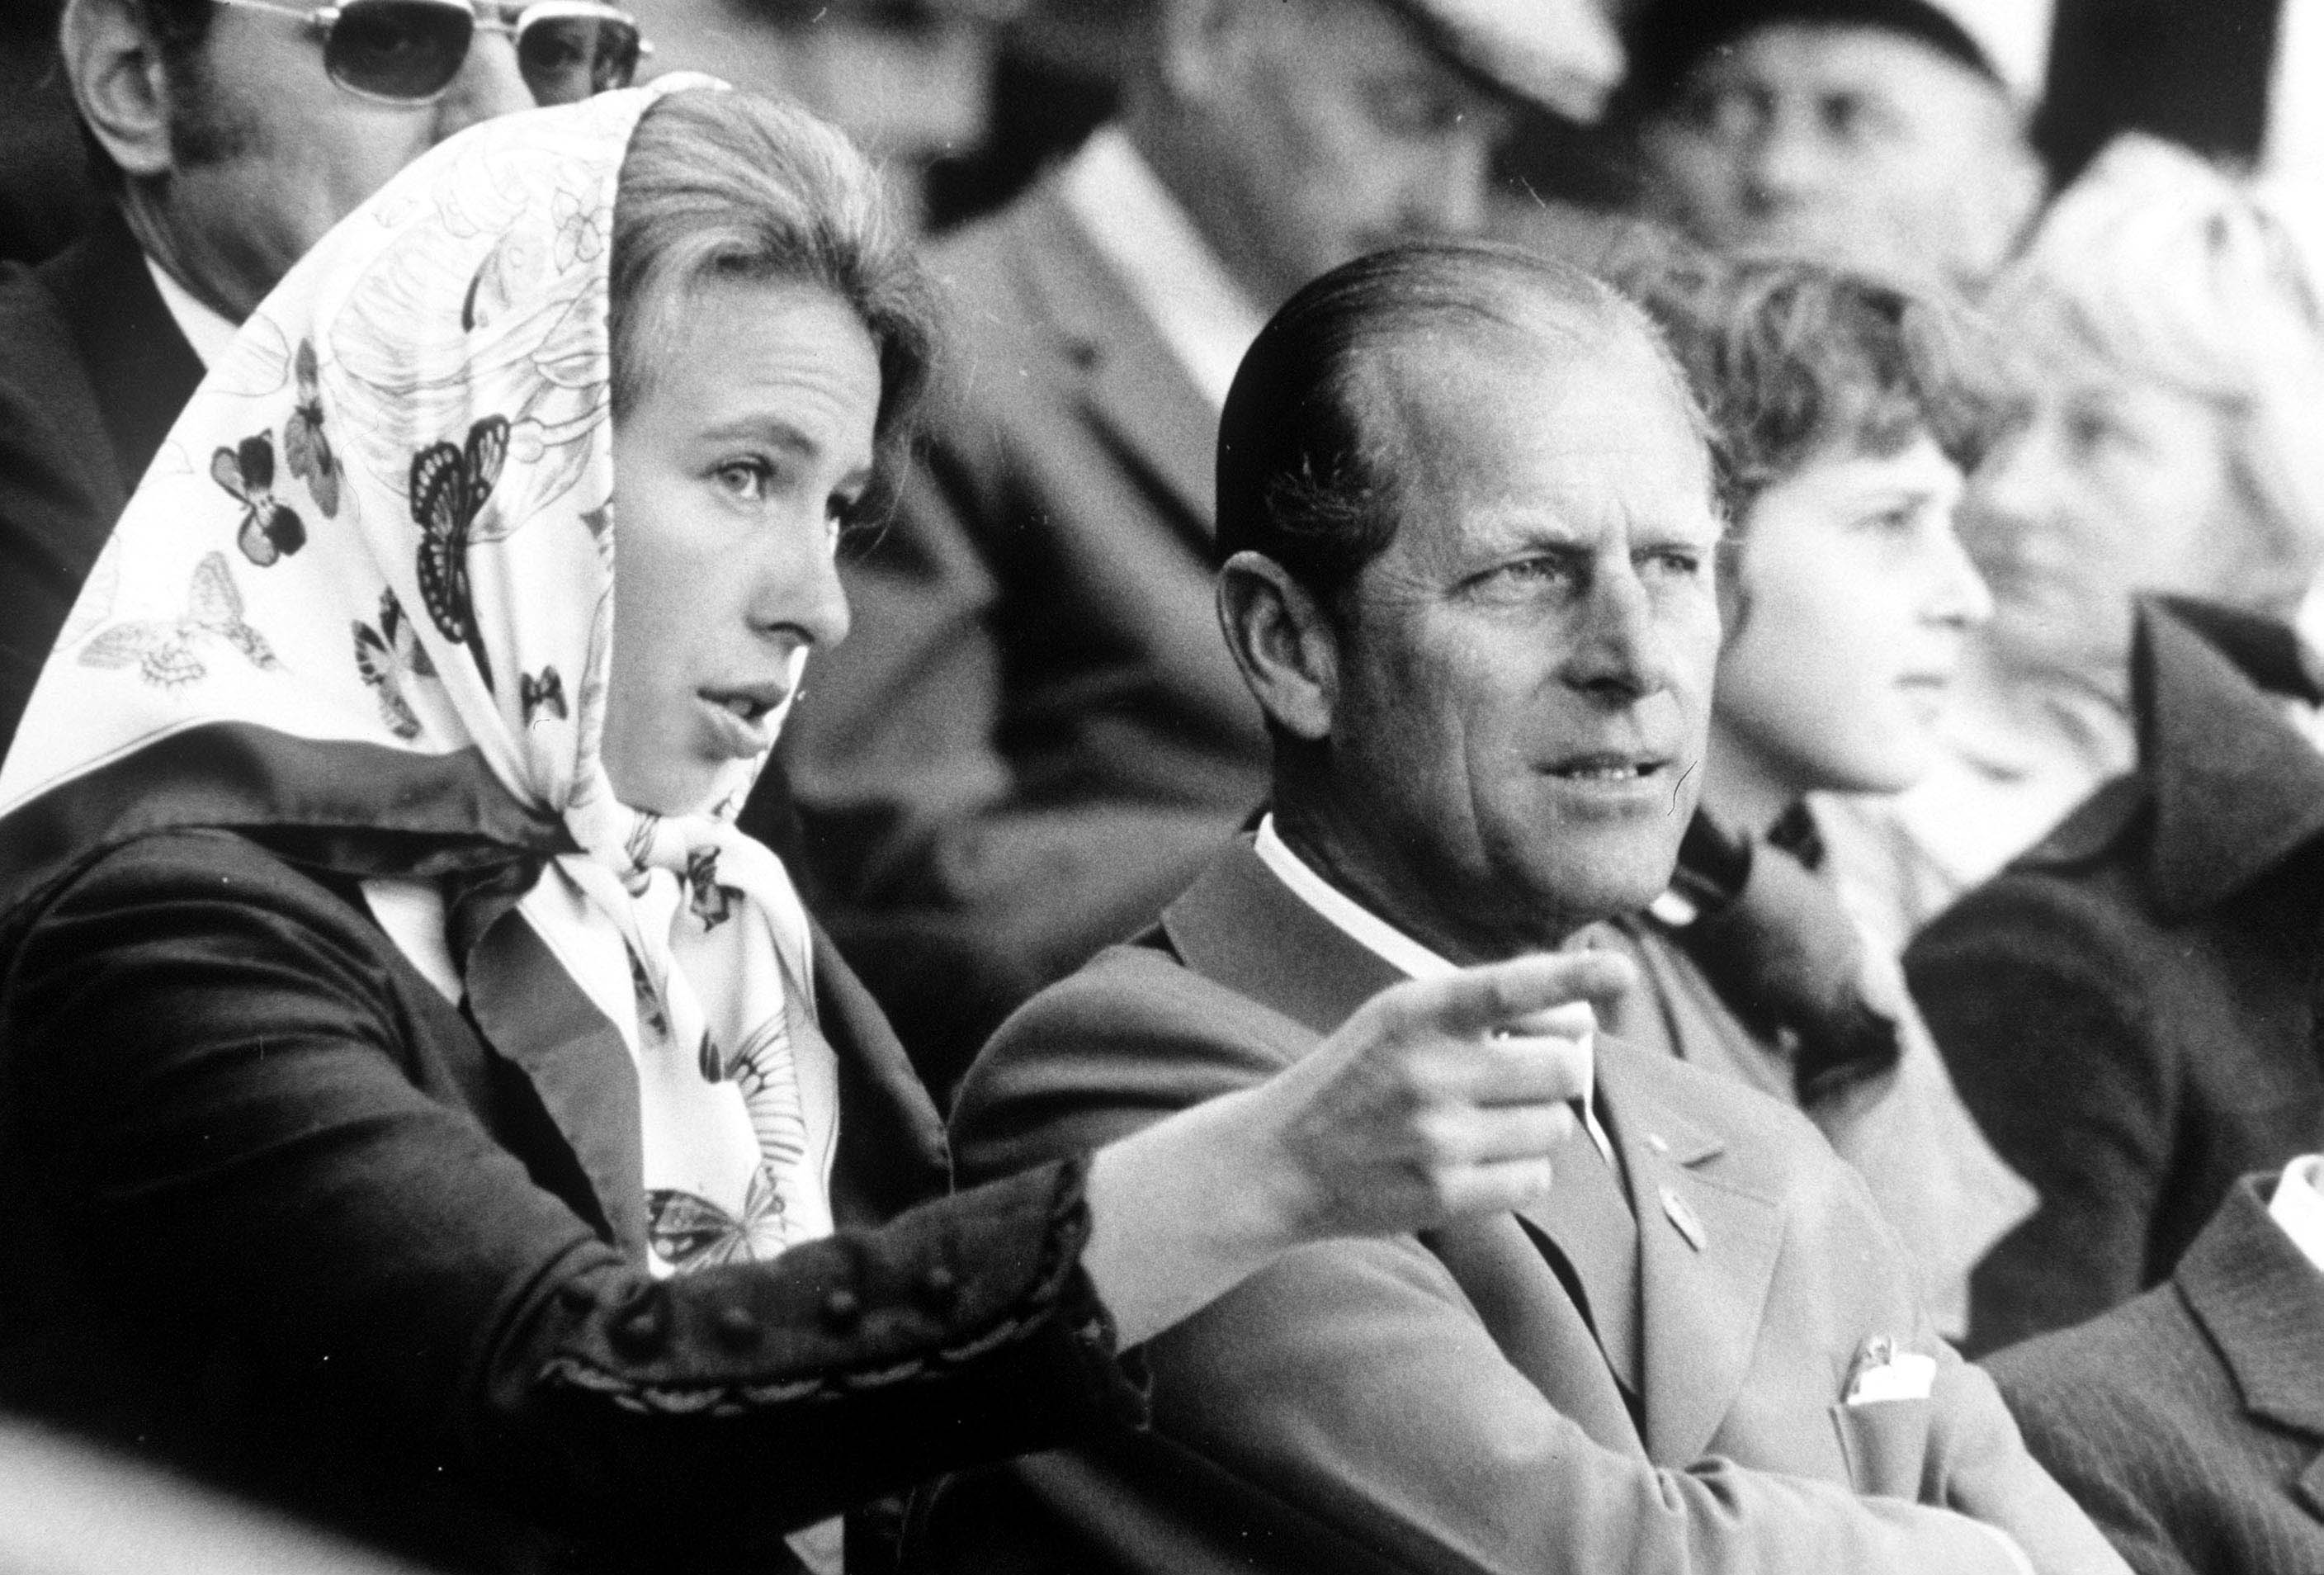 Princess Anne with her father Prince Phillip in Munich Germany 1972. | Source: Getty Images